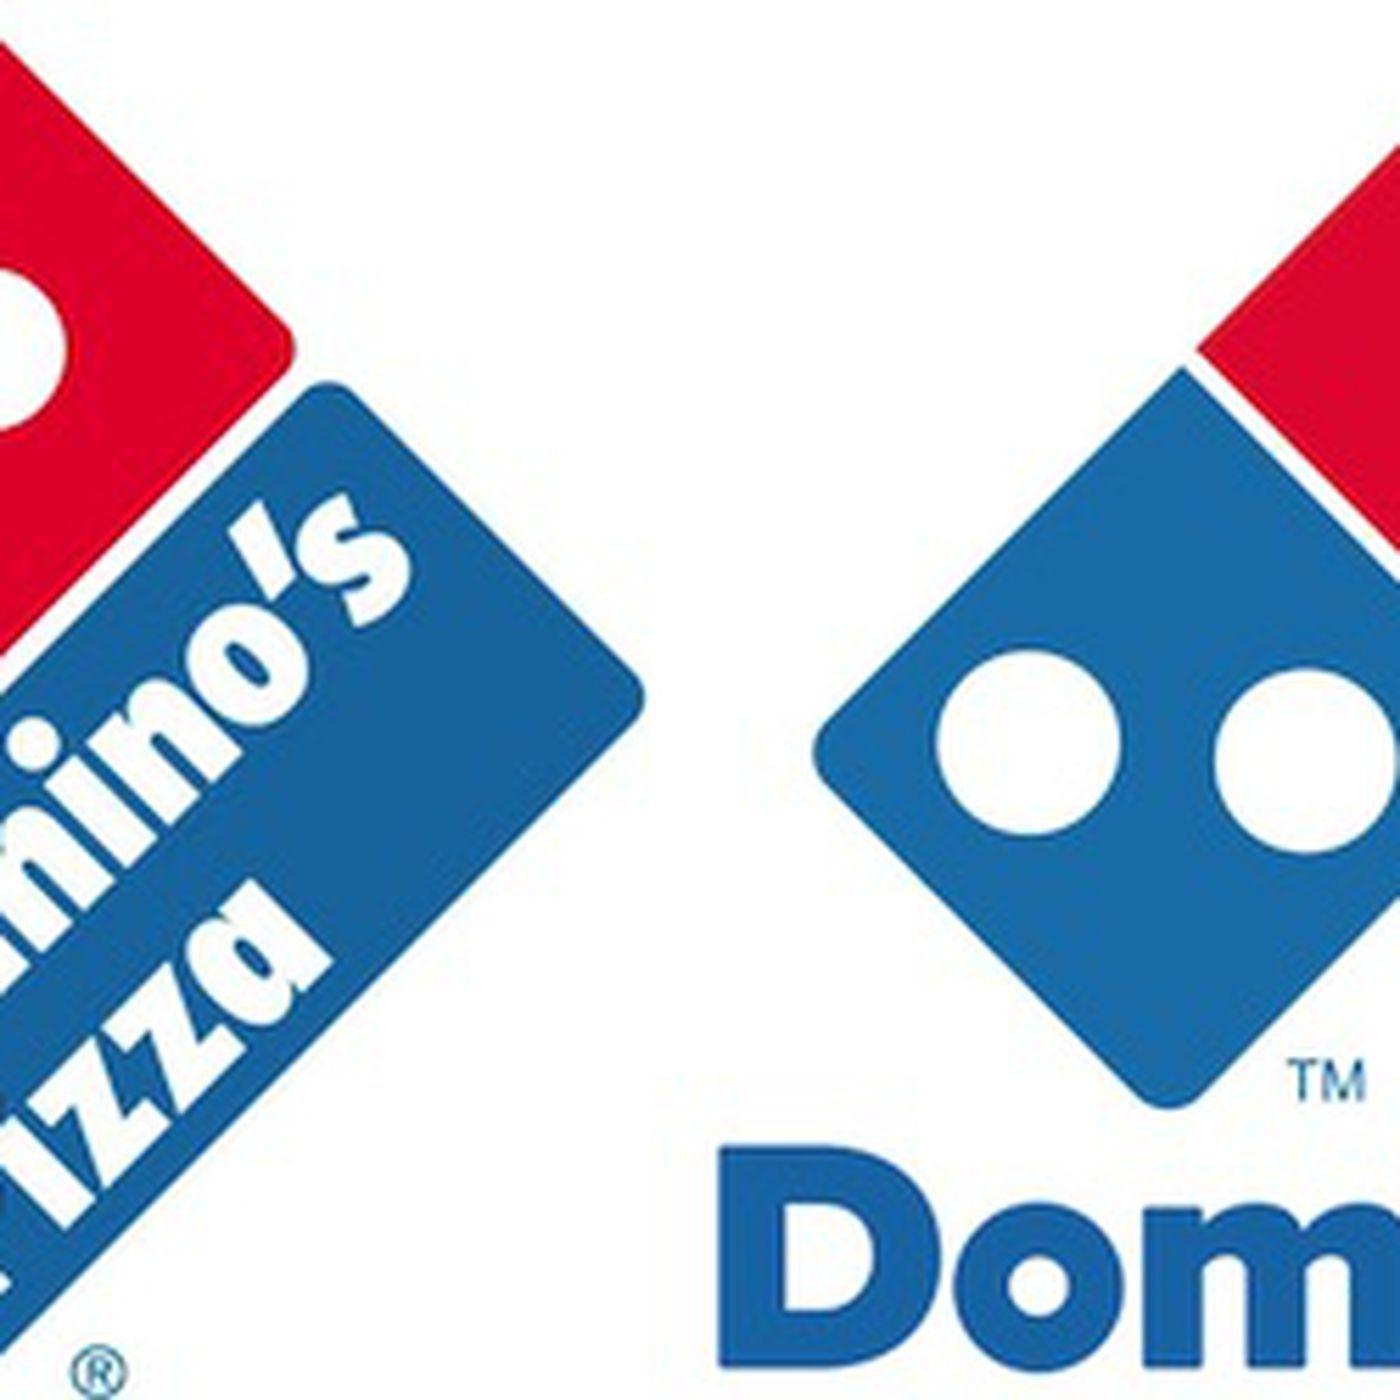 Old and New Logo - Domino's Removes 'Pizza' From Its New Logo - Eater